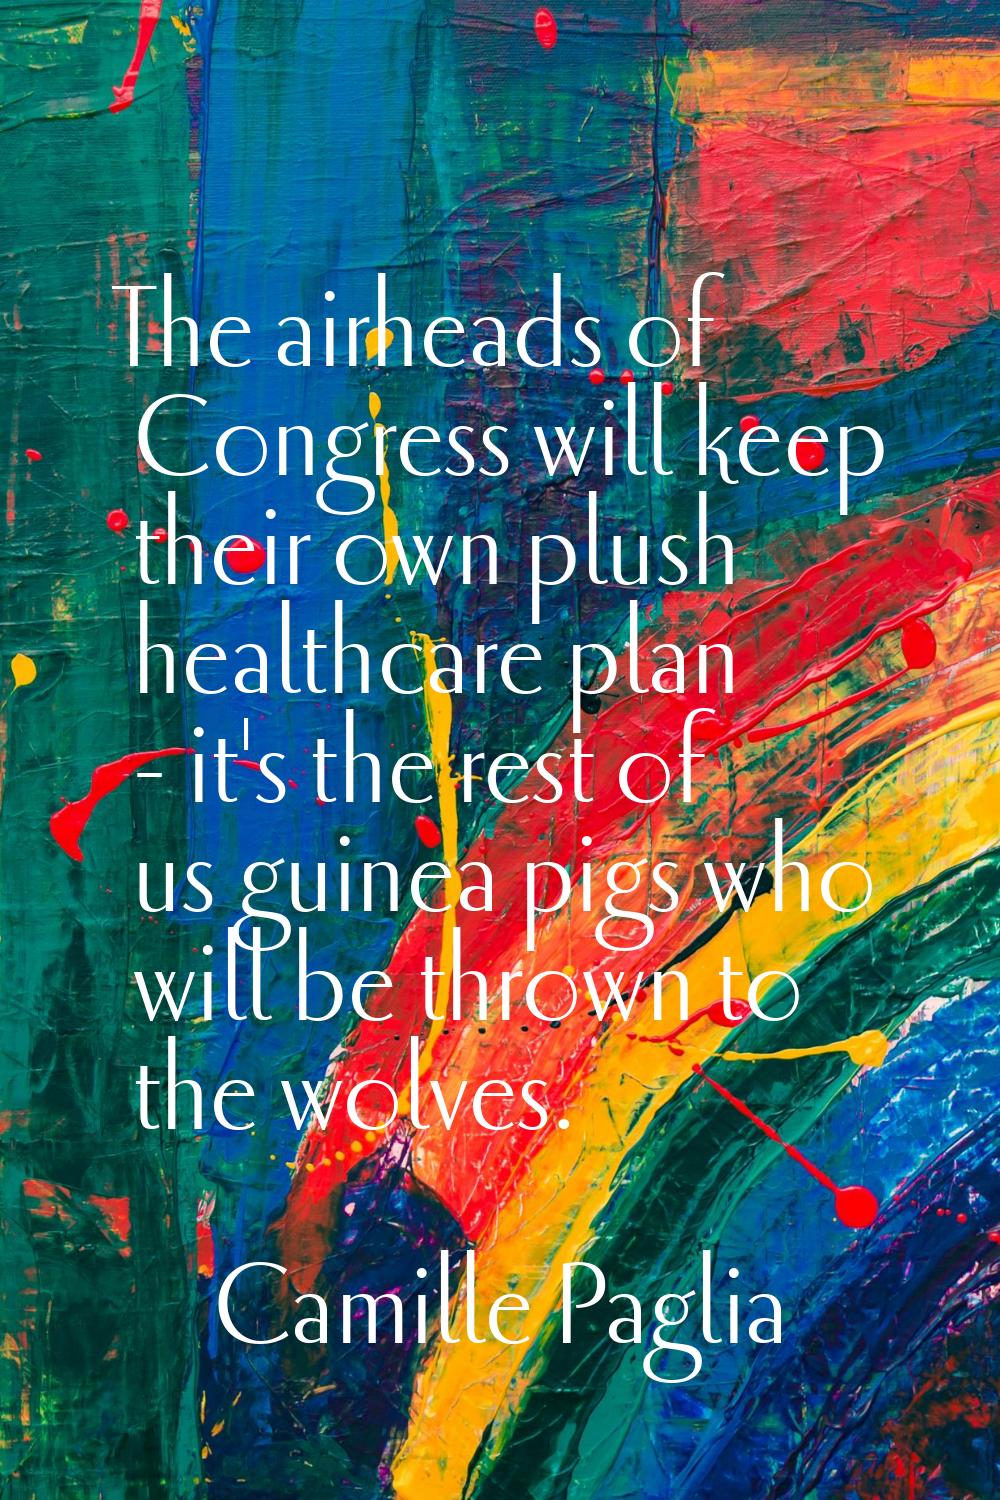 The airheads of Congress will keep their own plush healthcare plan - it's the rest of us guinea pig